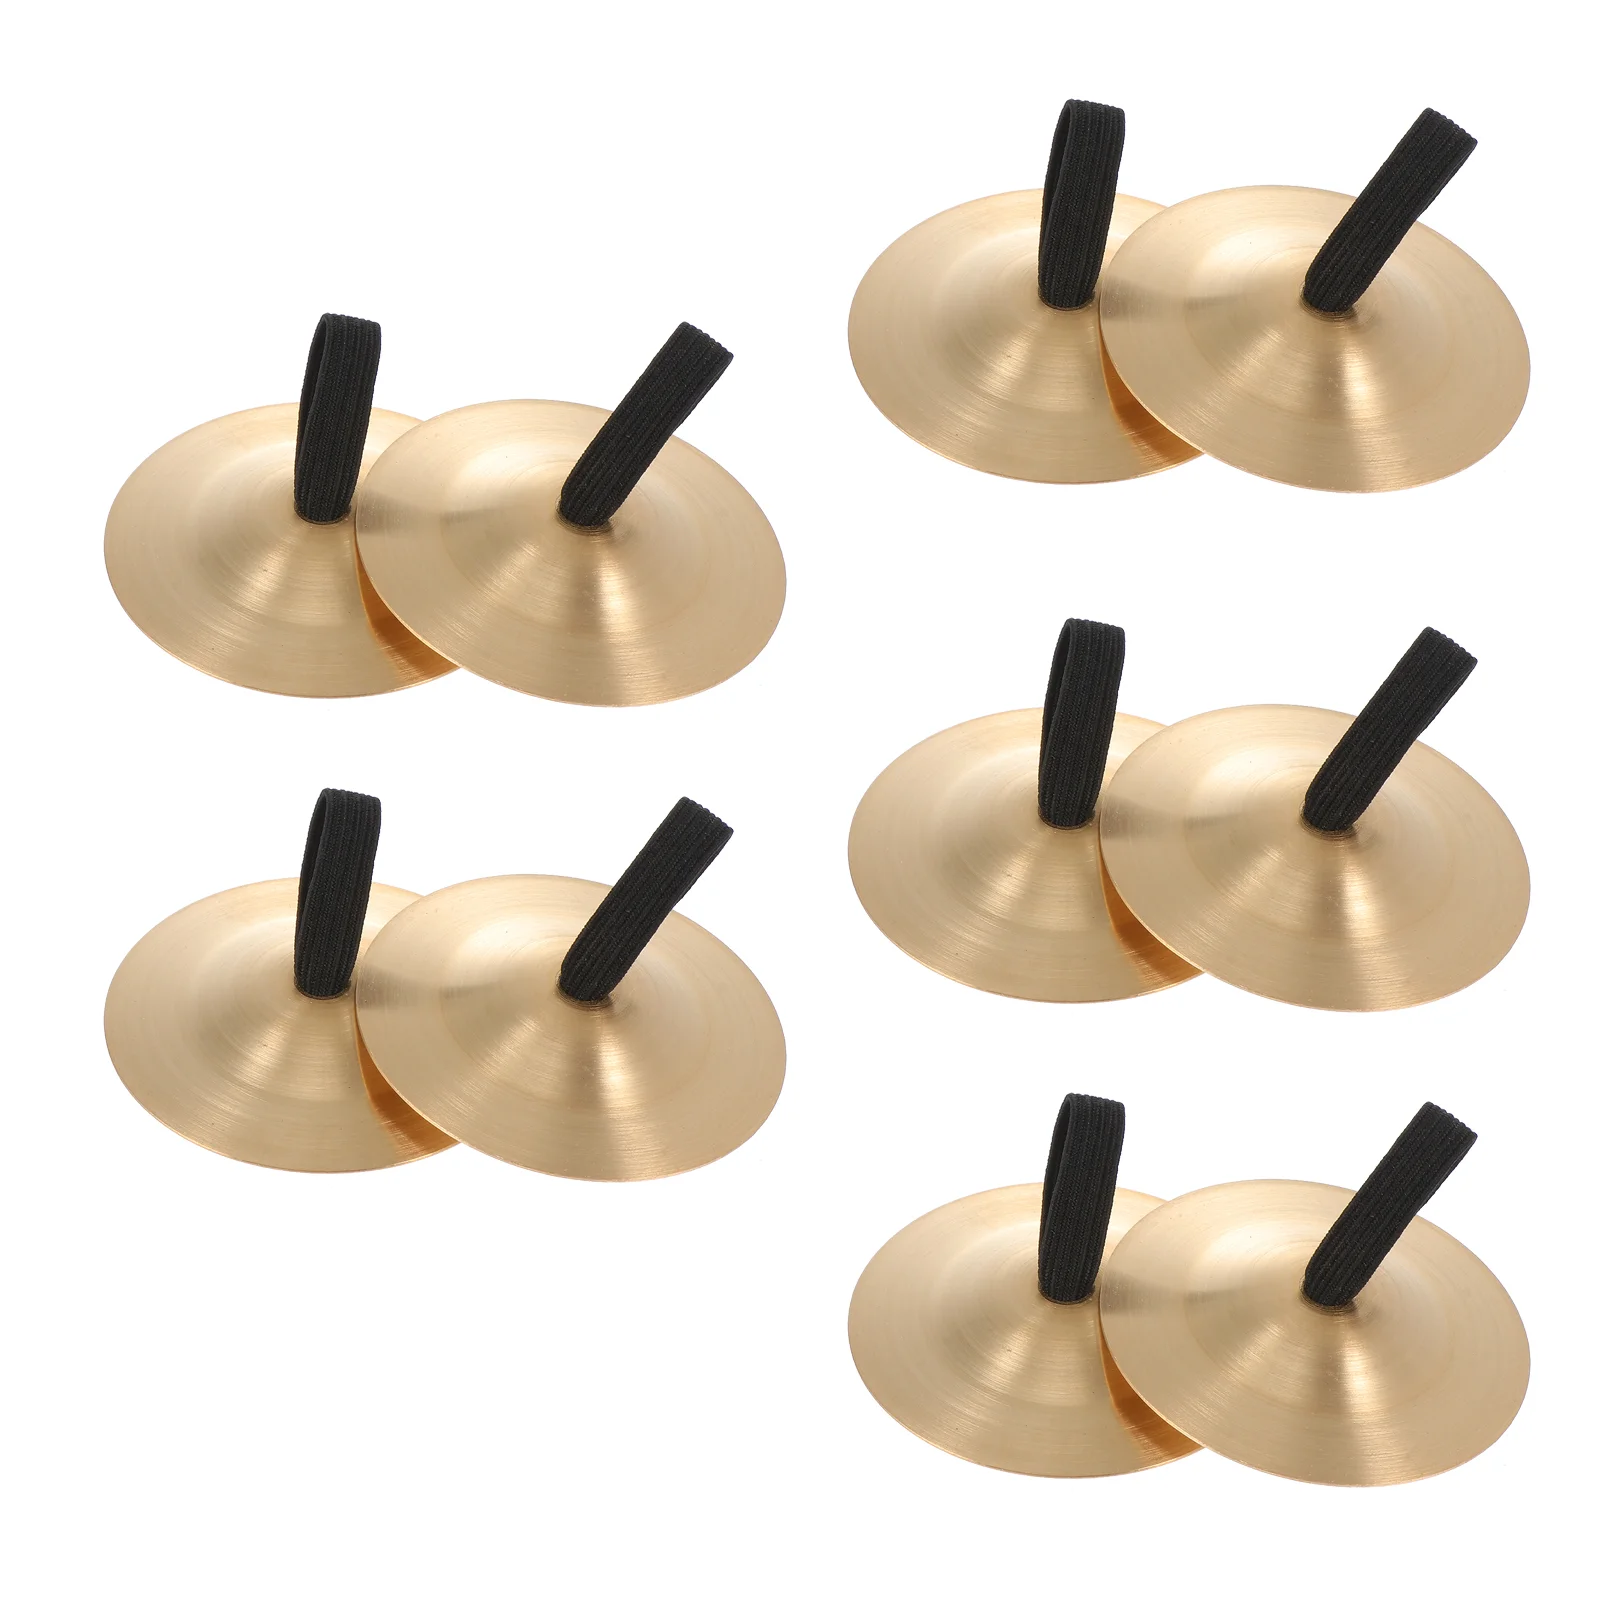 

10 Pcs Orff Copper Cymbals Lyre Harp Small Belly Dancing Finger Music Kids Instrument Mini Child Children Percussion